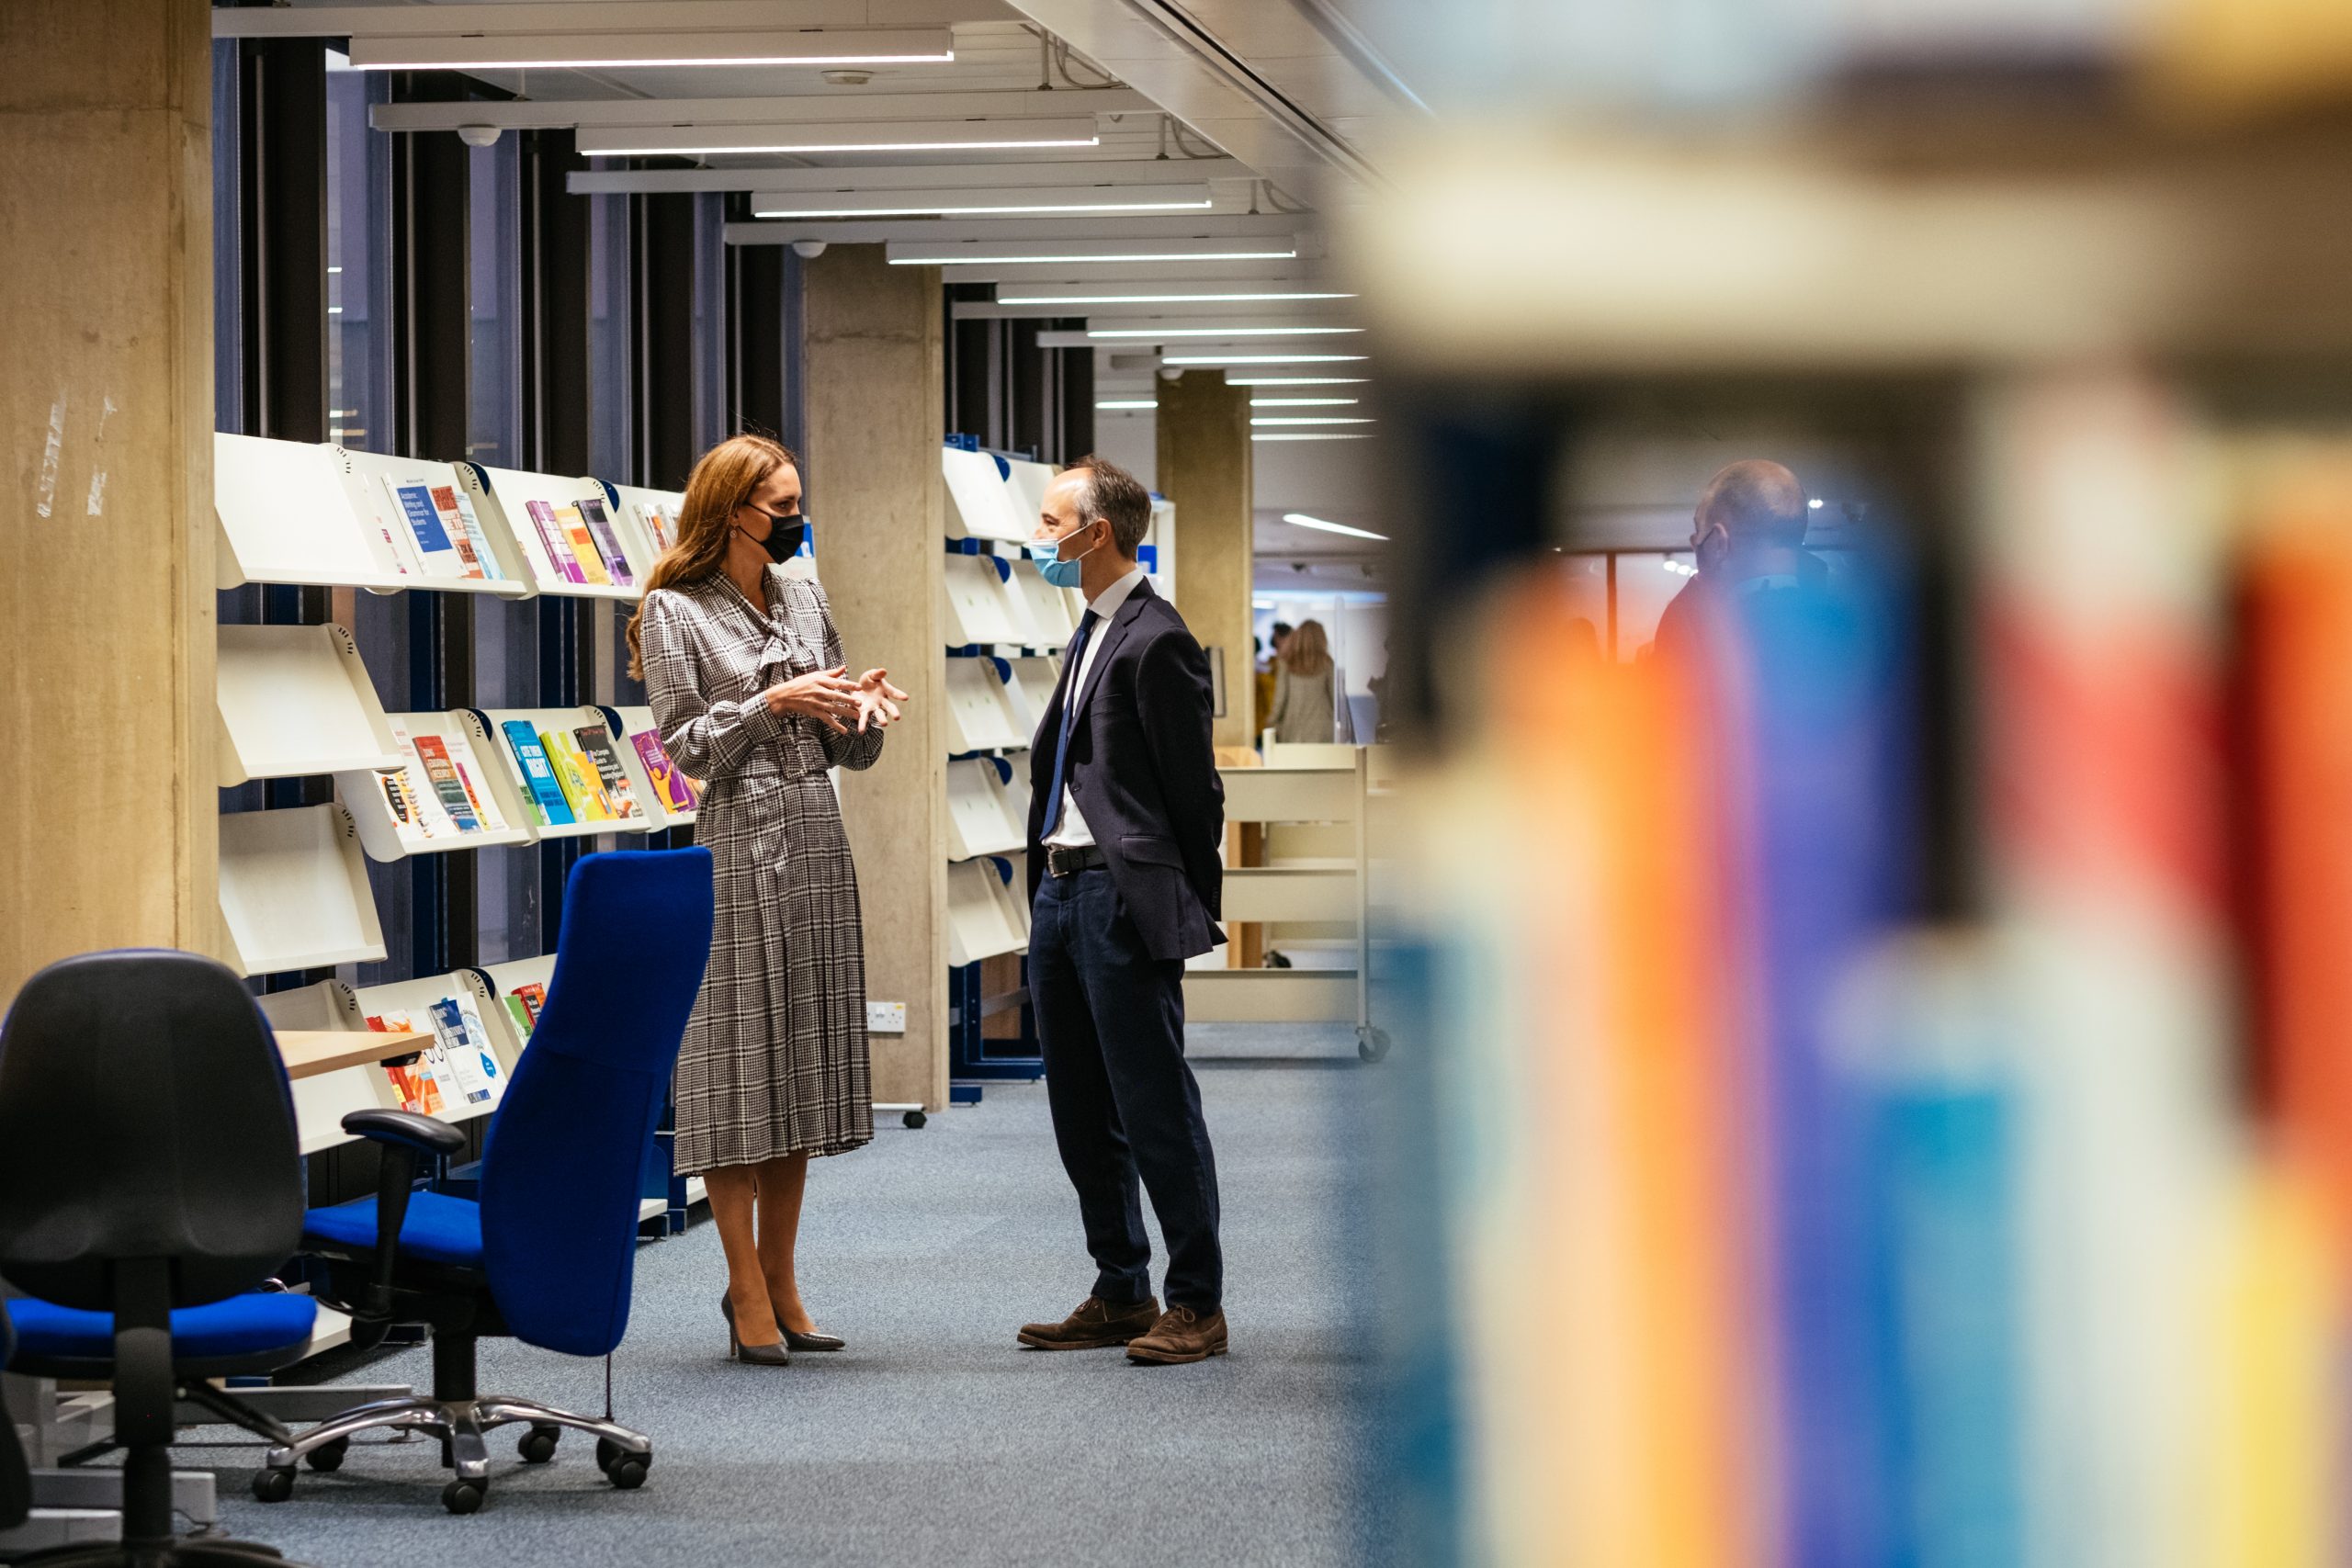 The Duchess of Cambridge and Pasco Fearon talking in the IOE Library